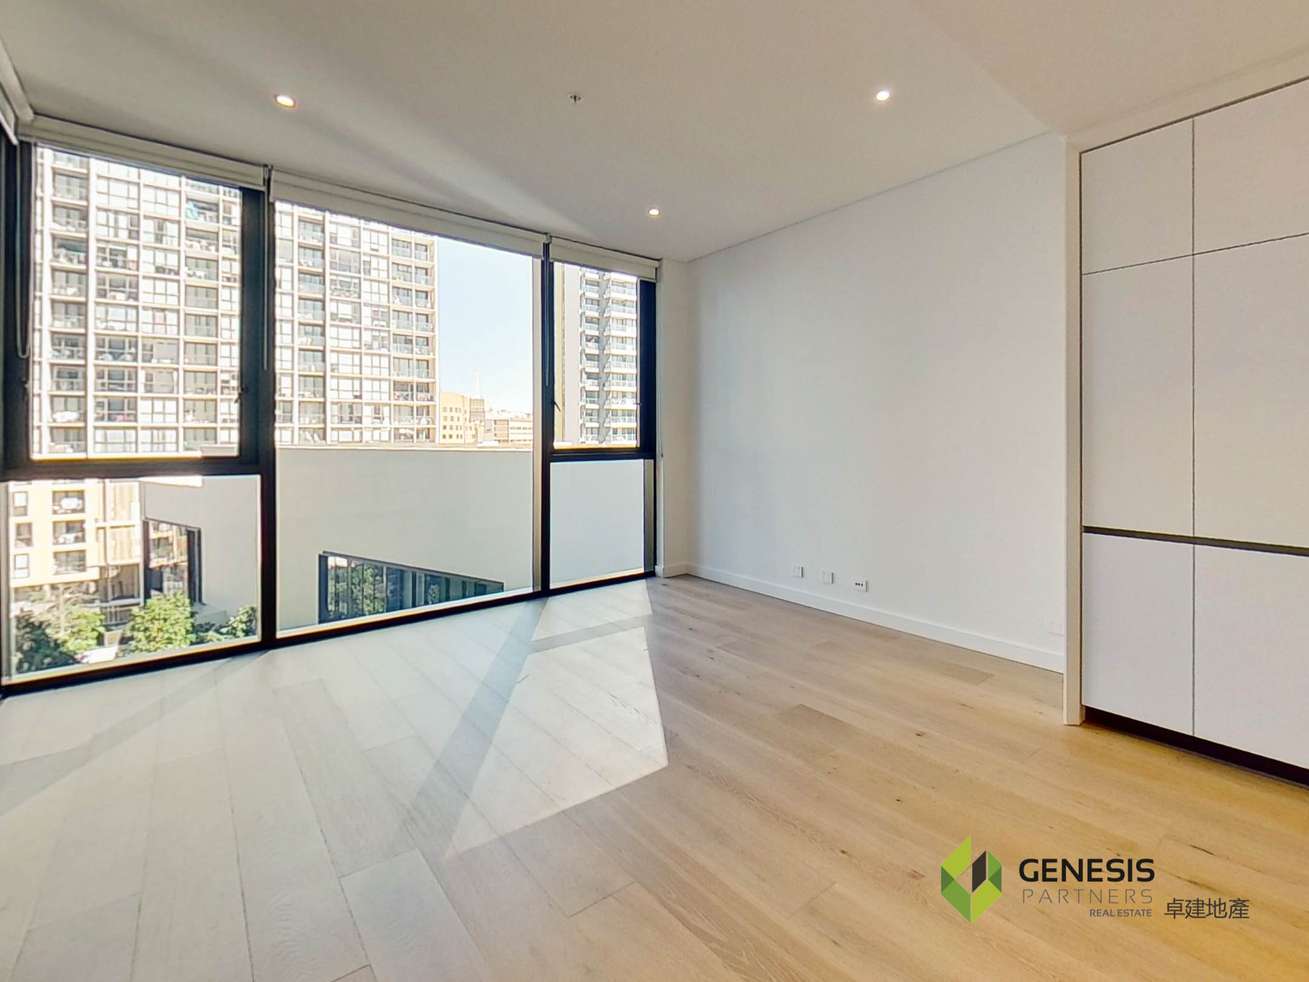 Main view of Homely apartment listing, 1001/81 Harbour Street, Haymarket NSW 2000